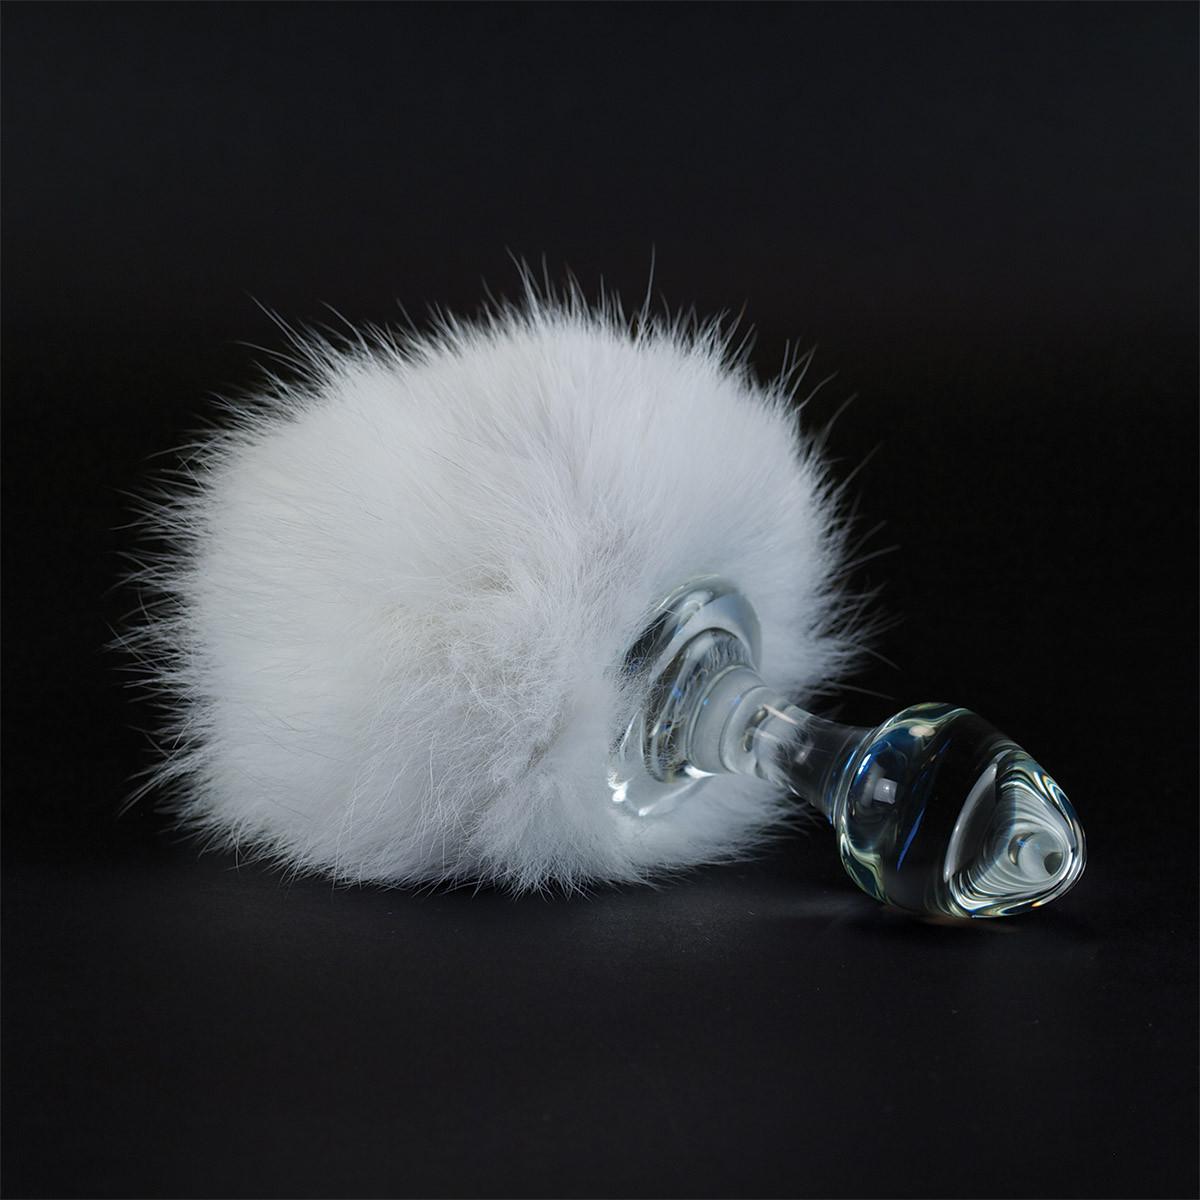 Magnetic Bunny Tail Glass Butt Plug By Crystal Delights - Hamilton Park Electronics